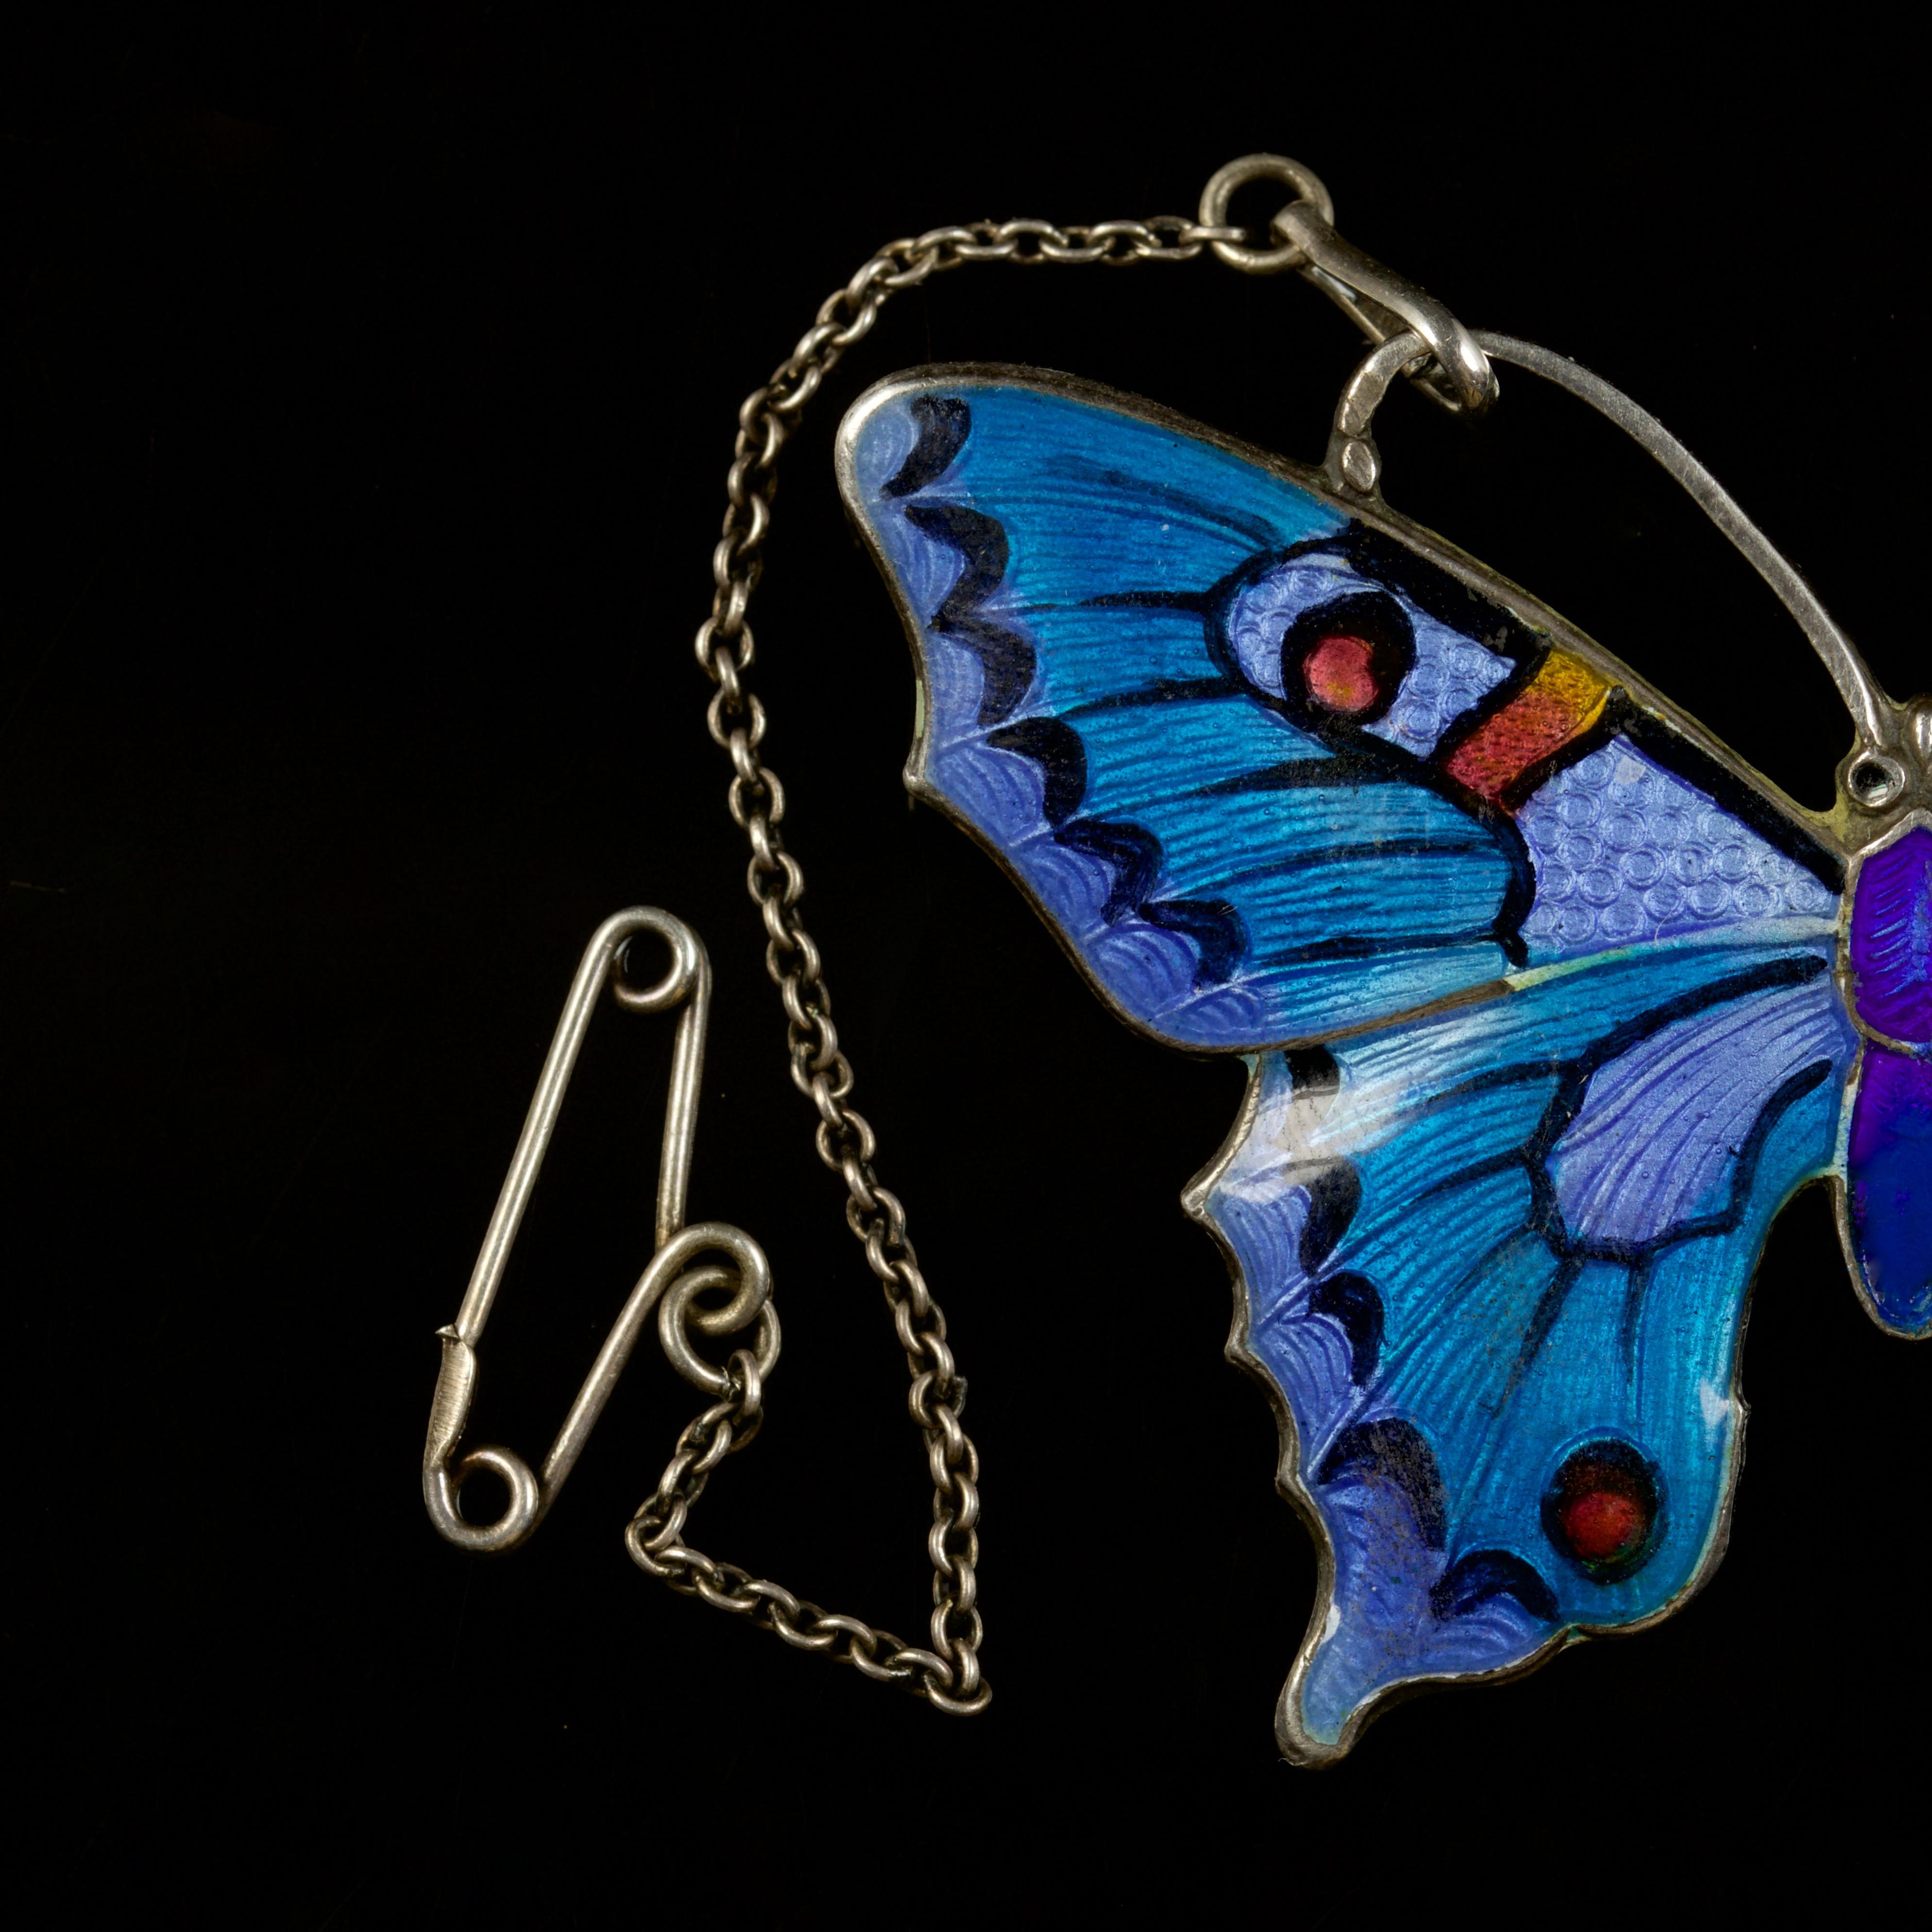 This beautiful Victorian butterfly brooch is set in Sterling Silver, Circa 1900.

Butterfly or insect jewellery is highly collectable and was a symbol of good luck to the wearer during the Victorian era.

The butterfly is beautifully decorated in